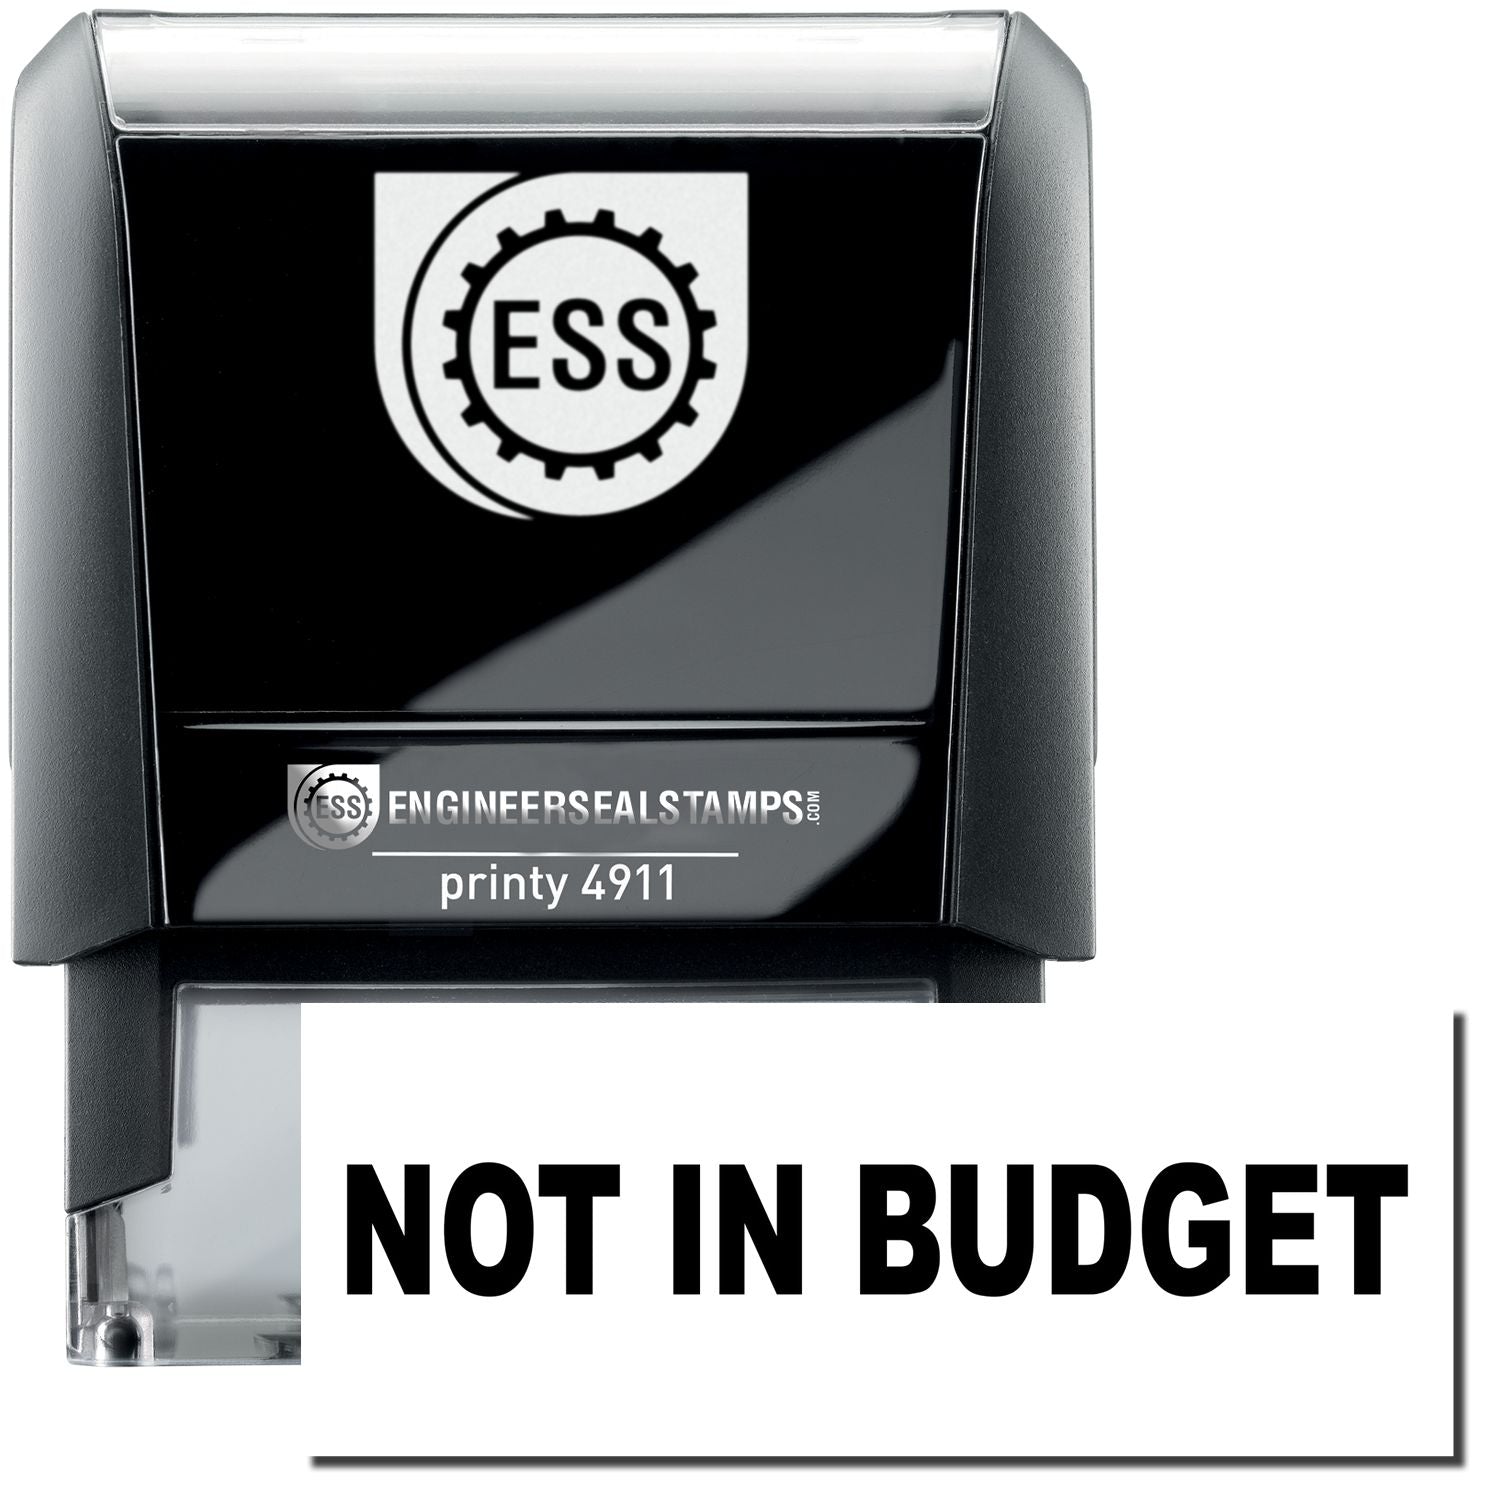 A self-inking stamp with a stamped image showing how the text "NOT IN BUDGET" is displayed after stamping.